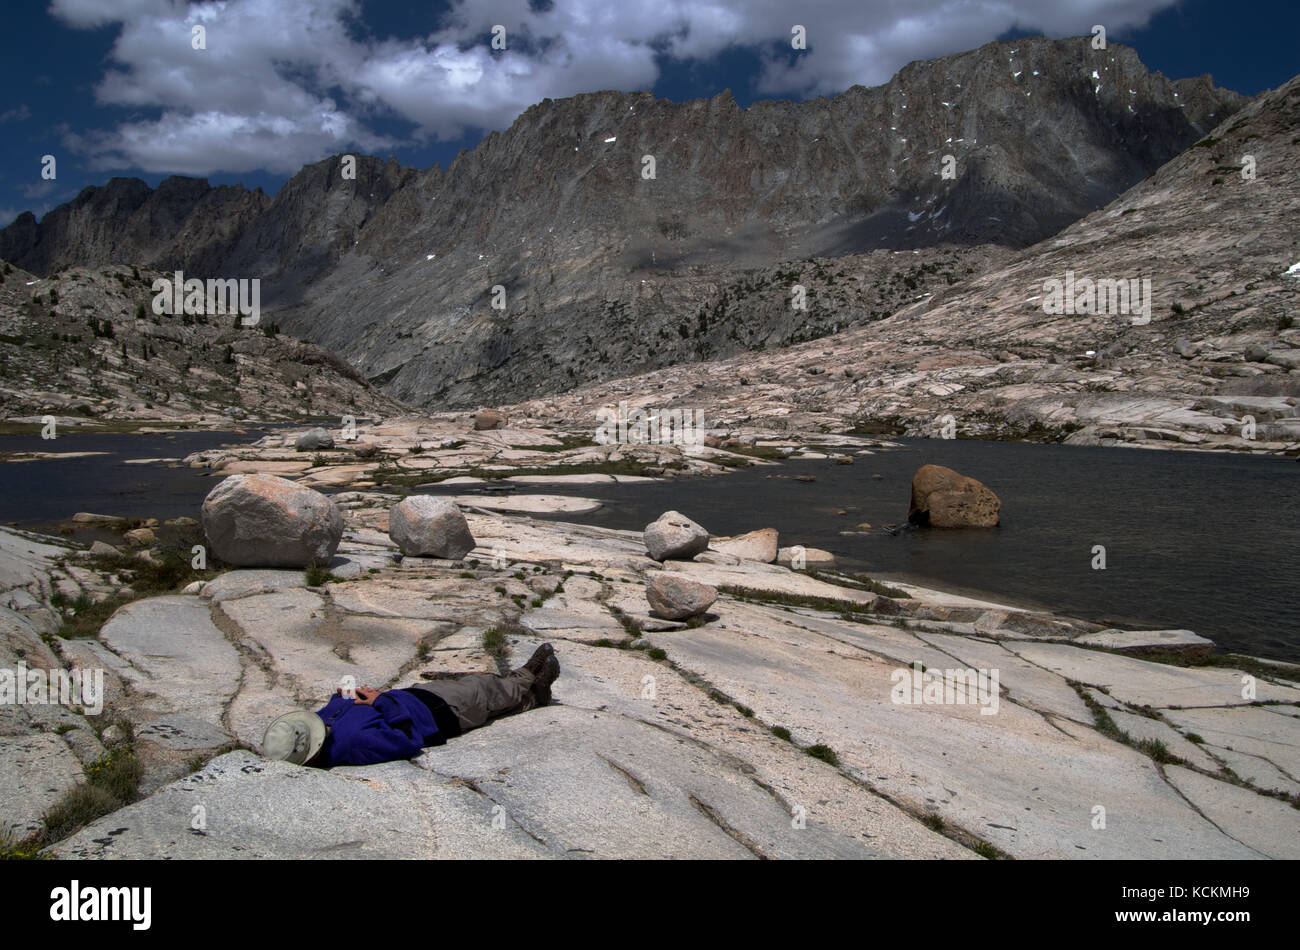 Hiker takes a rest stop next to Evolution Creek along the John Muir Trail in the Sierra Nevada California Stock Photo